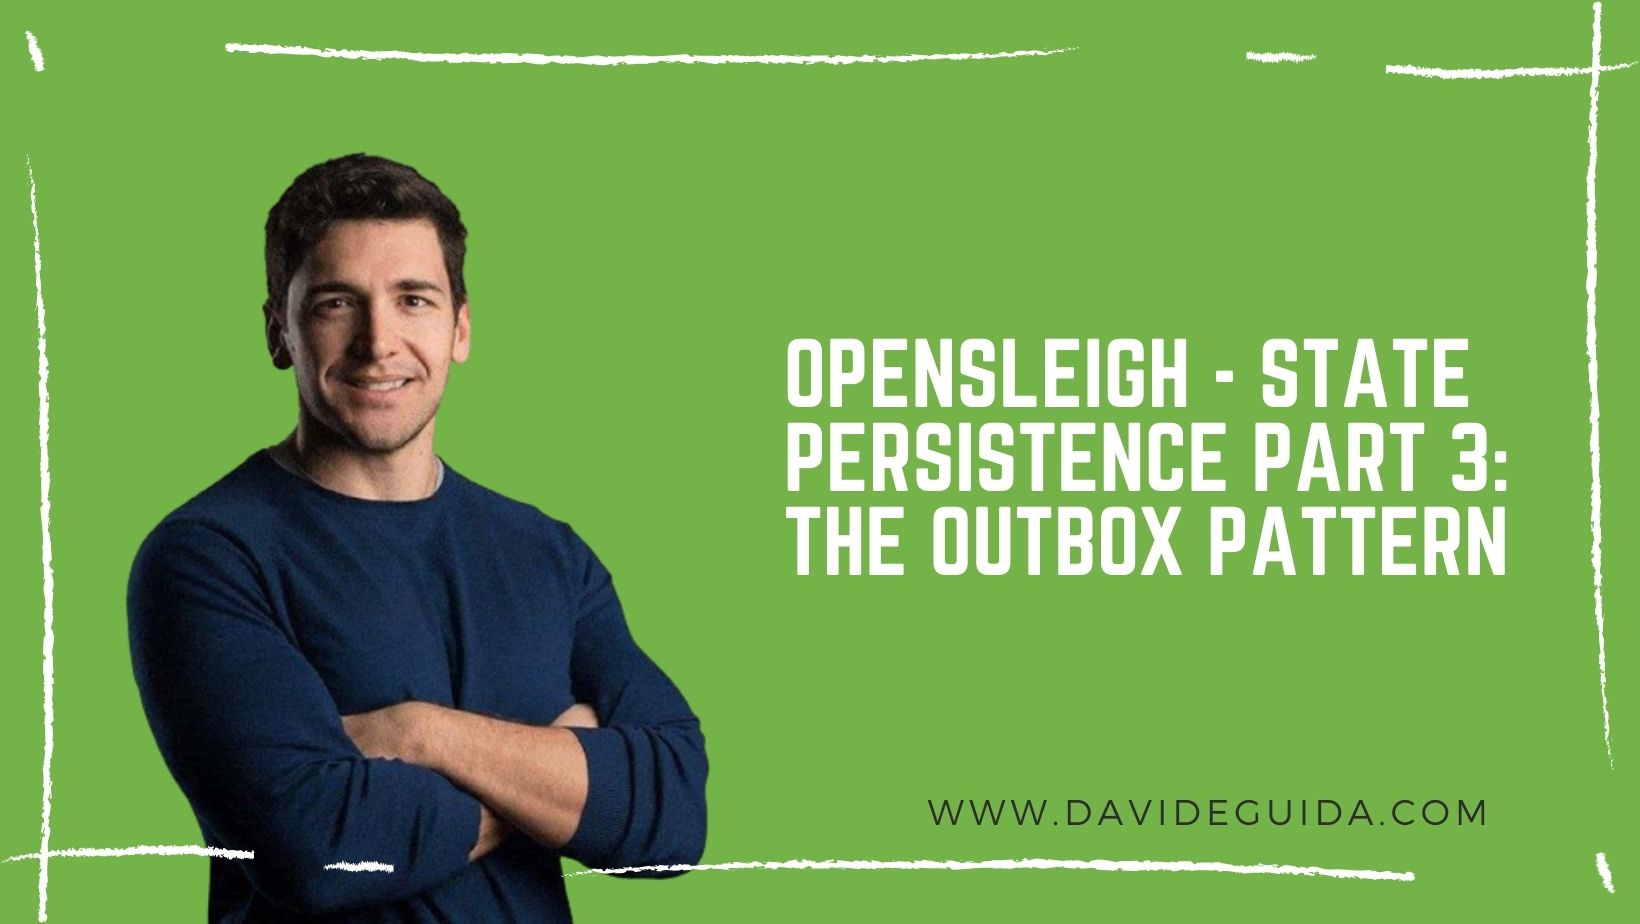 OpenSleigh – state persistence part 3: the outbox pattern